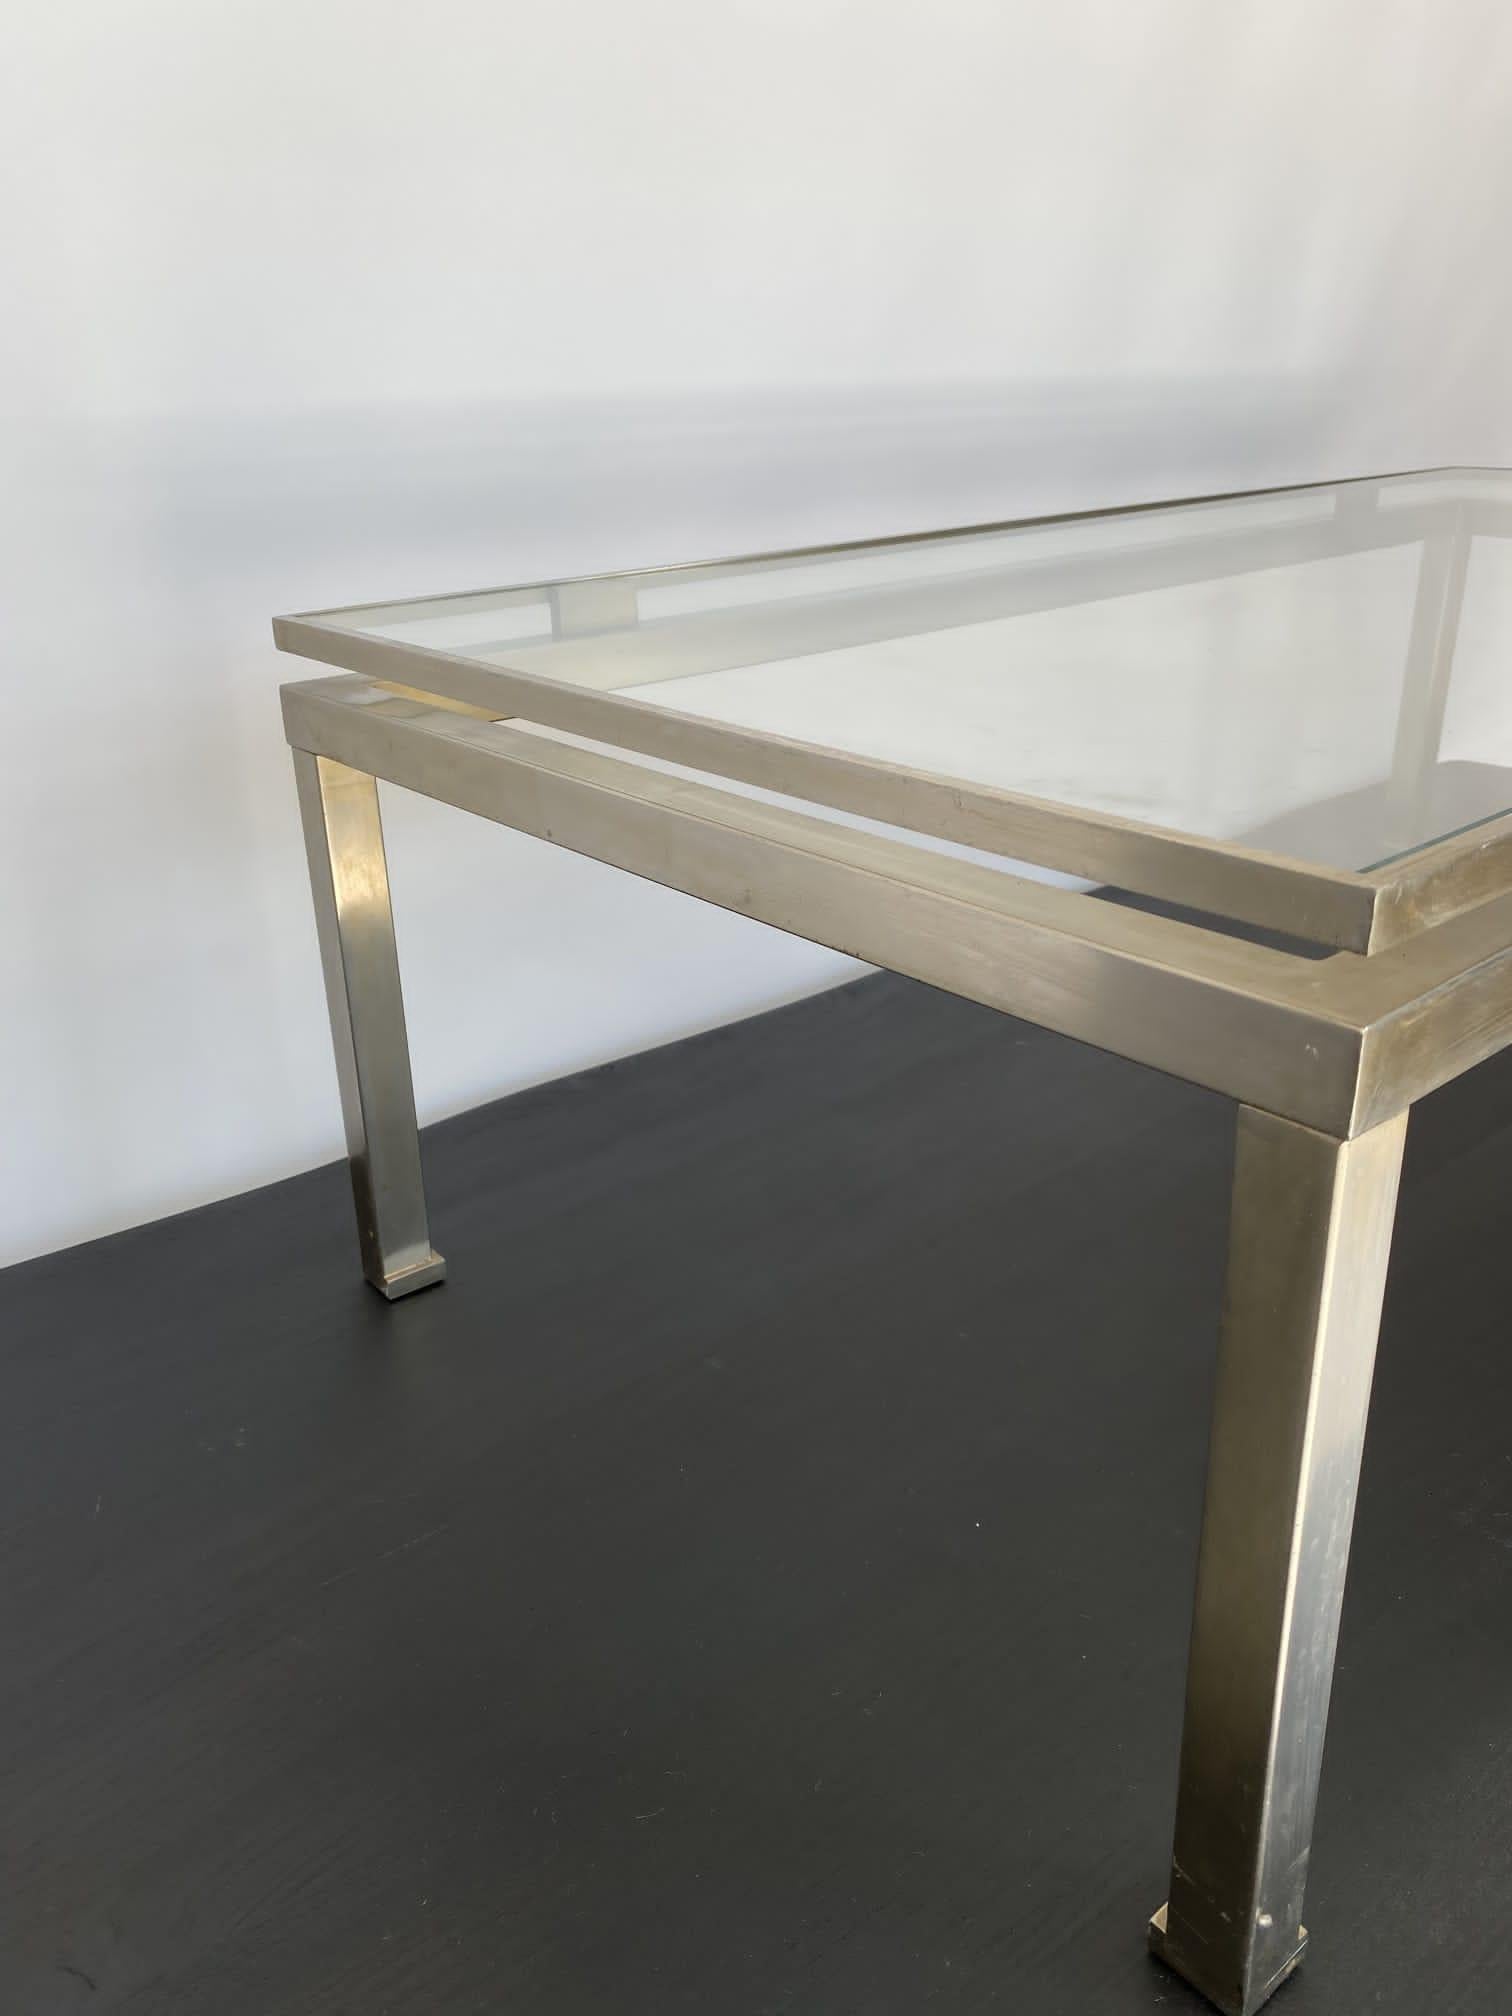 Mid-Century Brushed steel brass coffee table by Guy Lefevre for Maison Jansen 70
Good condition
Dimensions
H 37 cm 
D 112 cm 
W 57 cm.